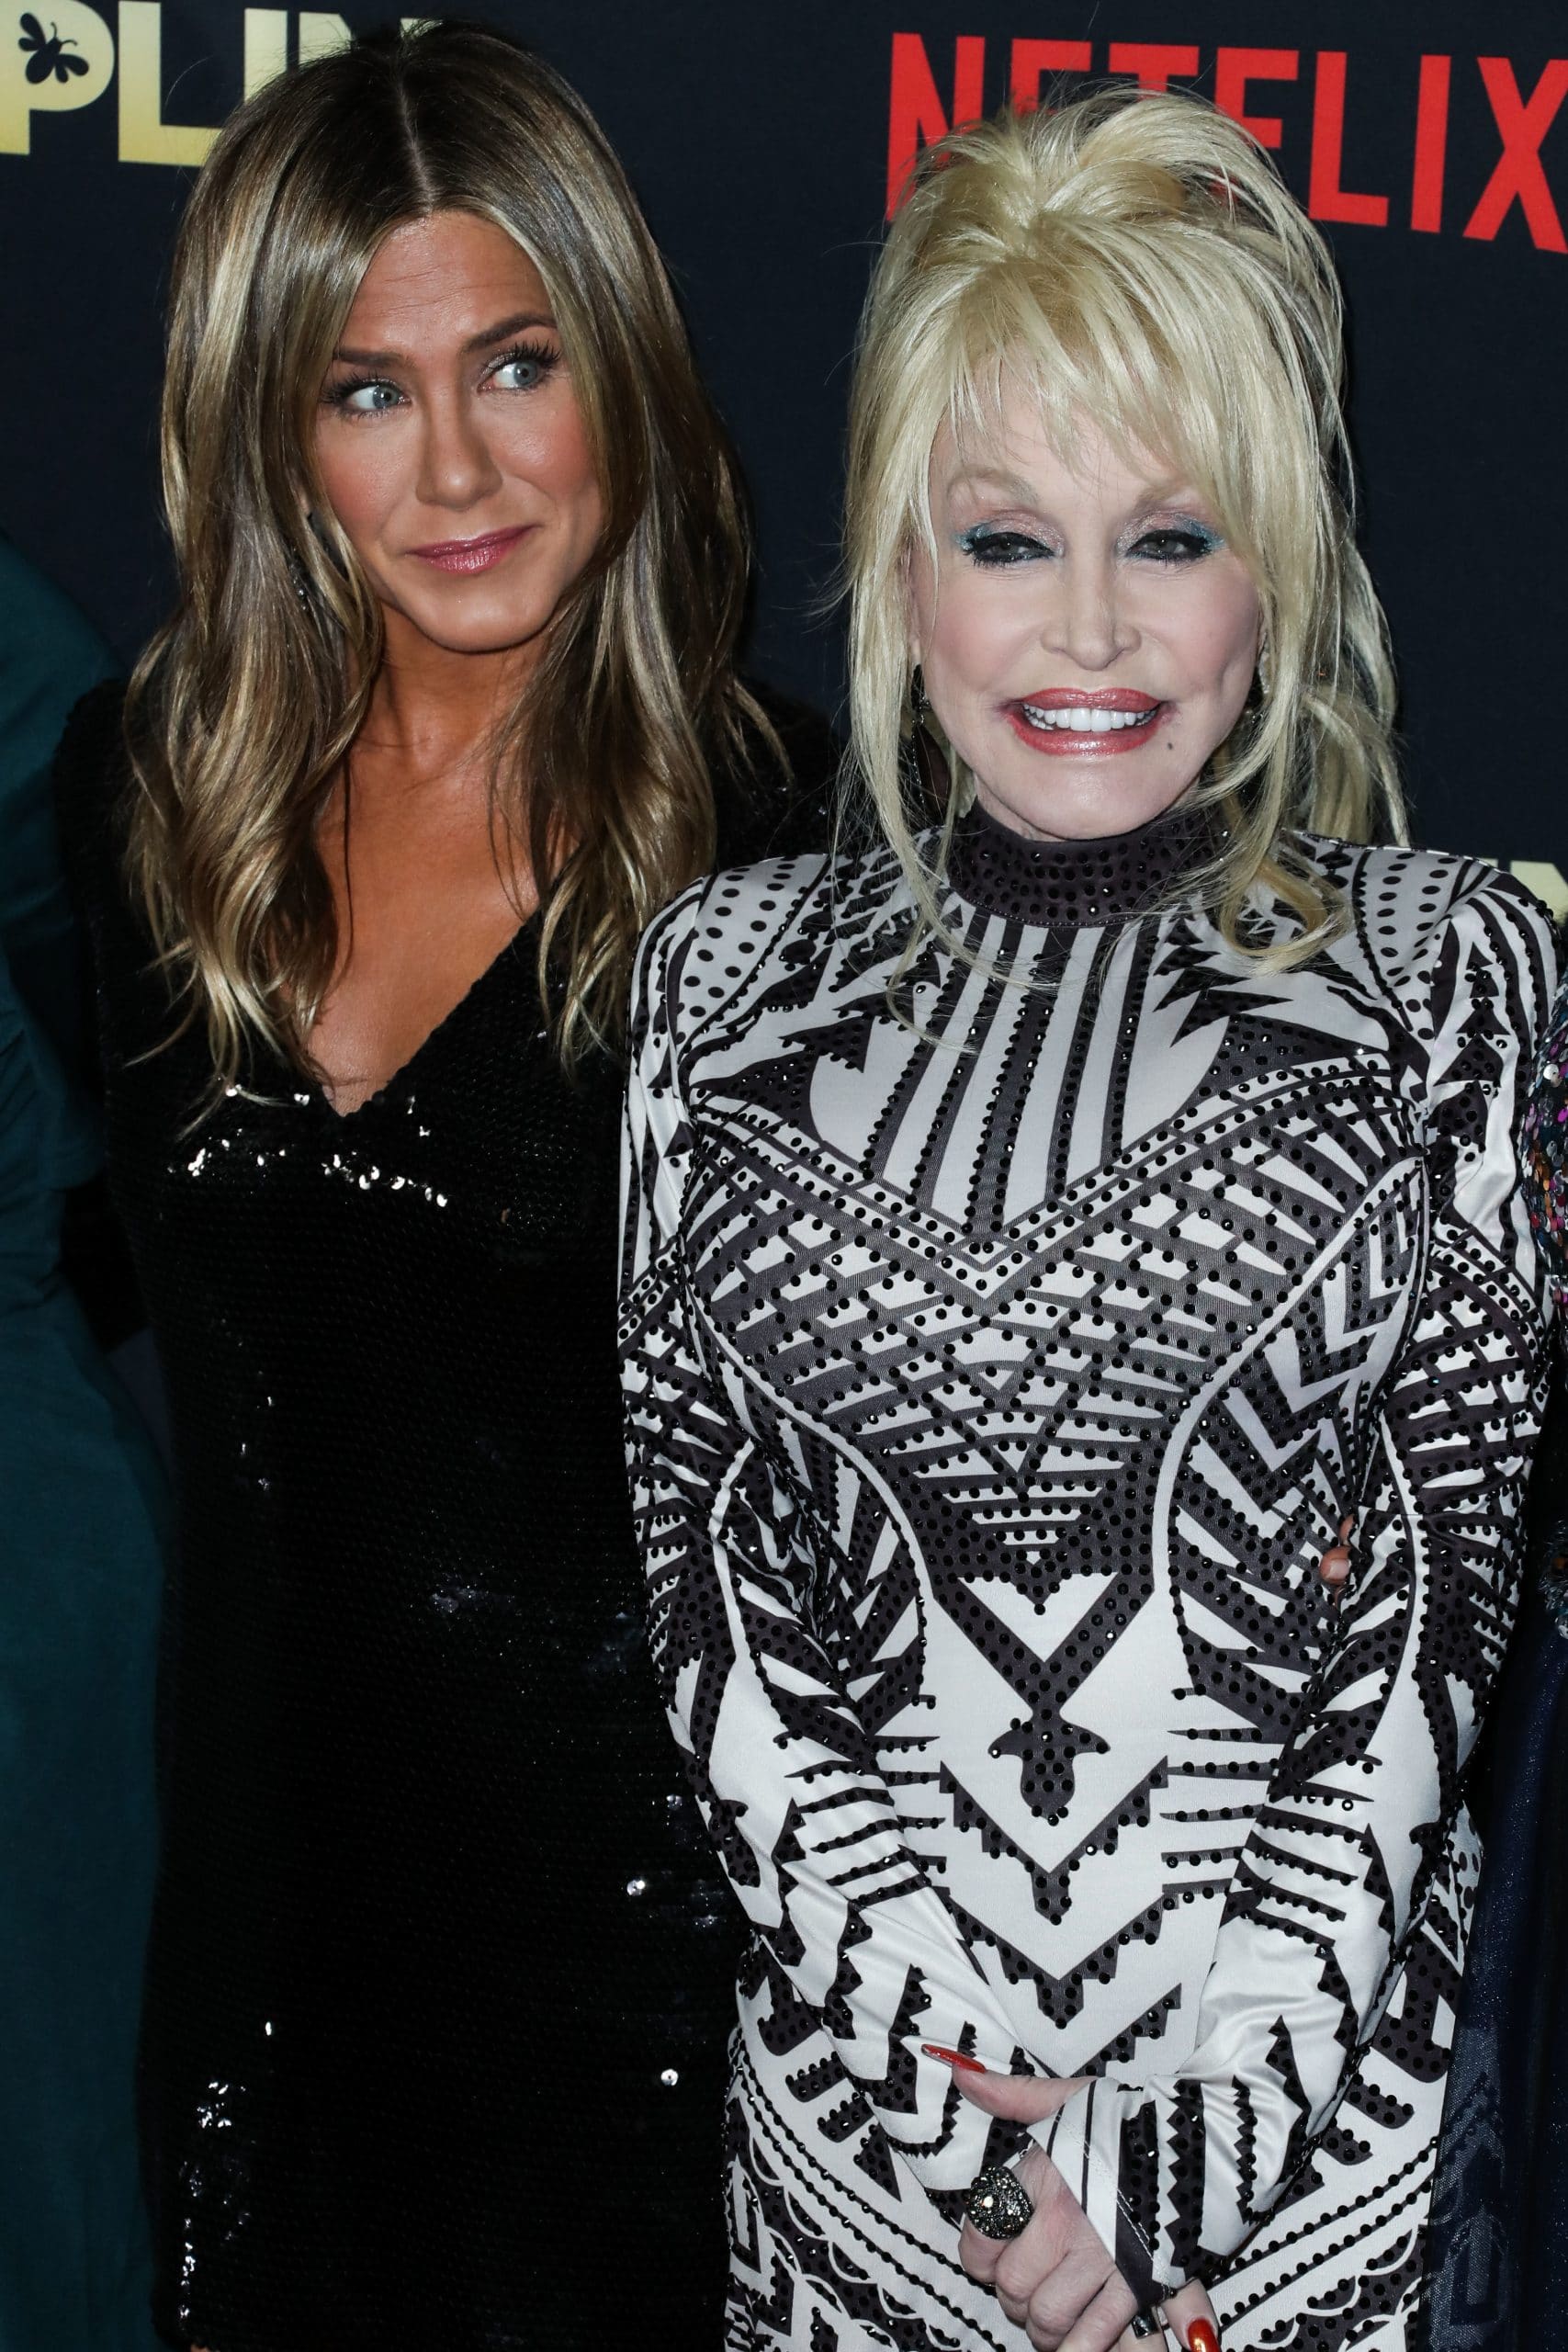 Actress Jennifer Aniston and singer Dolly Parton